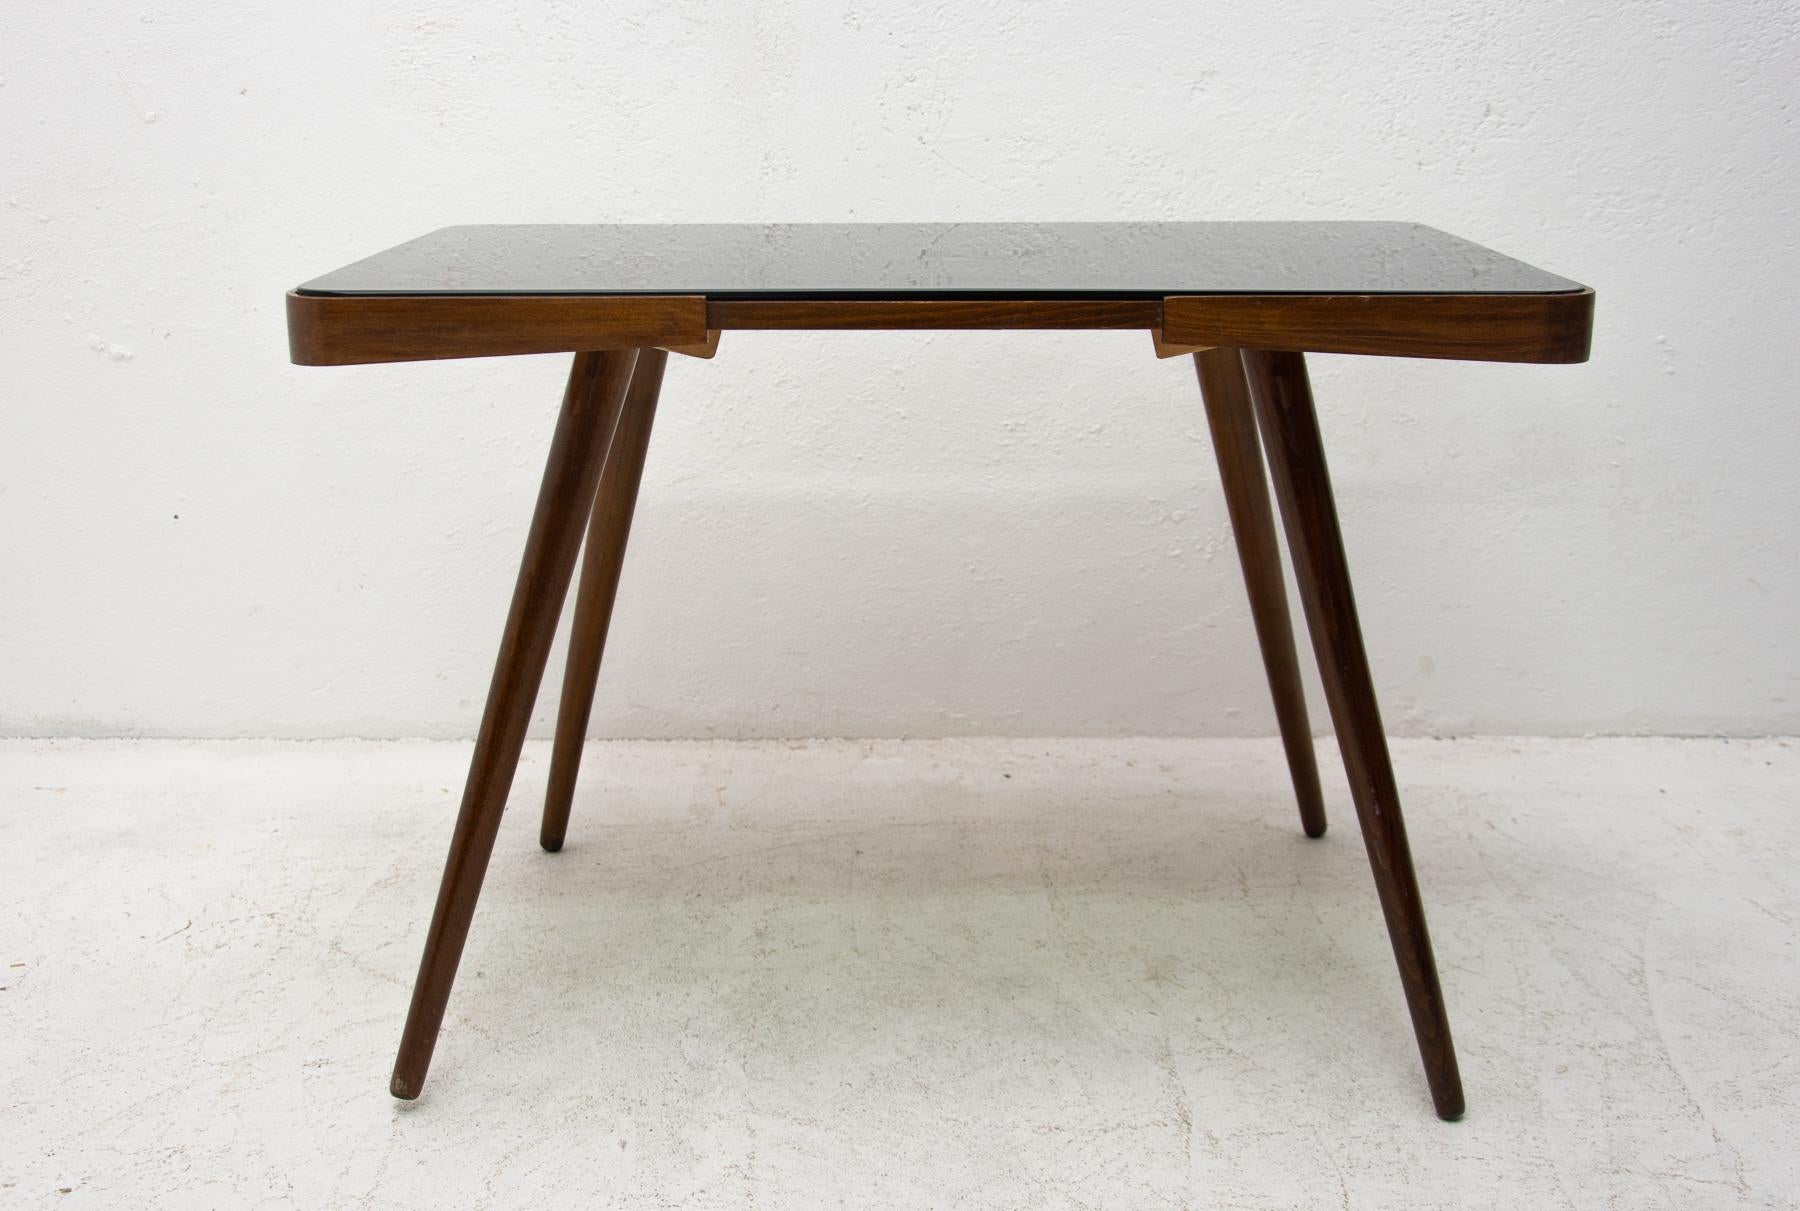 Midcentury opaxite glass coffee table from the 1960s. Associated with the world-renowned exhibition EXPO 58 in Brussels. It was produced by Ceský nábytek company. It features a beechwood structure and a black glass tabletop. In very good Vintage